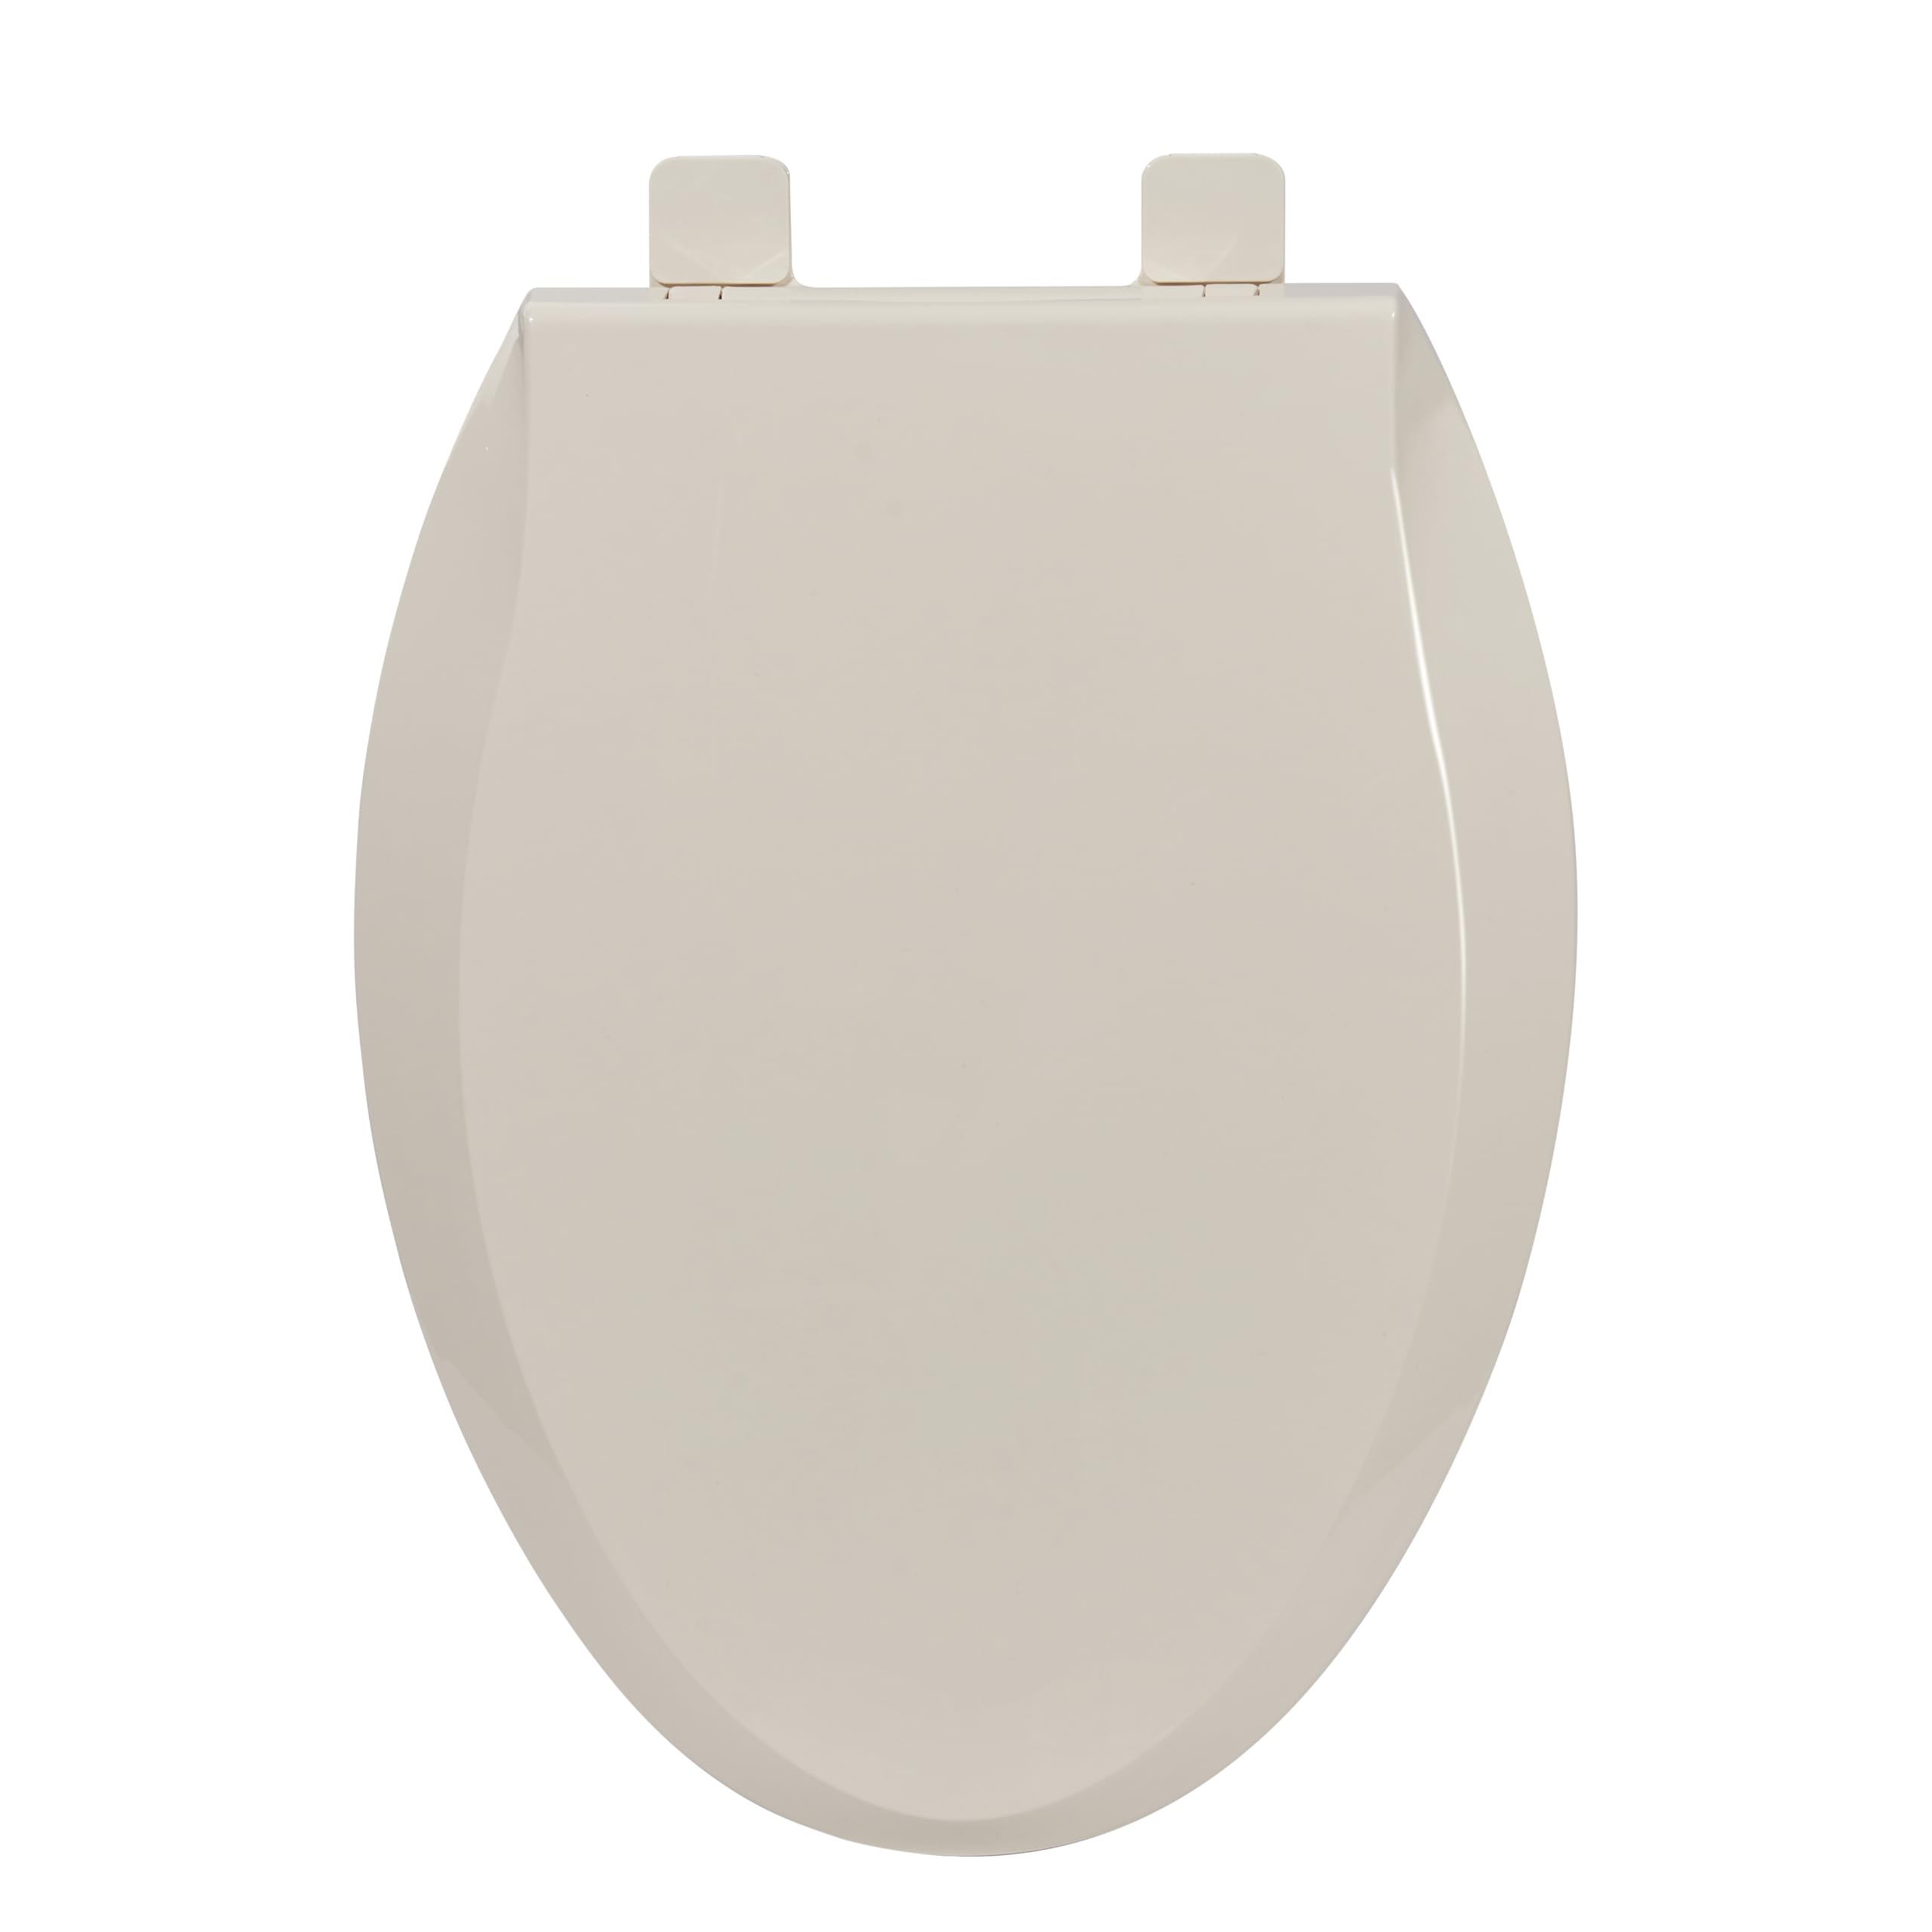 Toilet Seat, Elongated Toilet Seat with Toddler Seat Built in, Potty Training Toilet Seat Elongated Fits Both Adult and Child, with Slow Close and Magnets- Elongated Almond